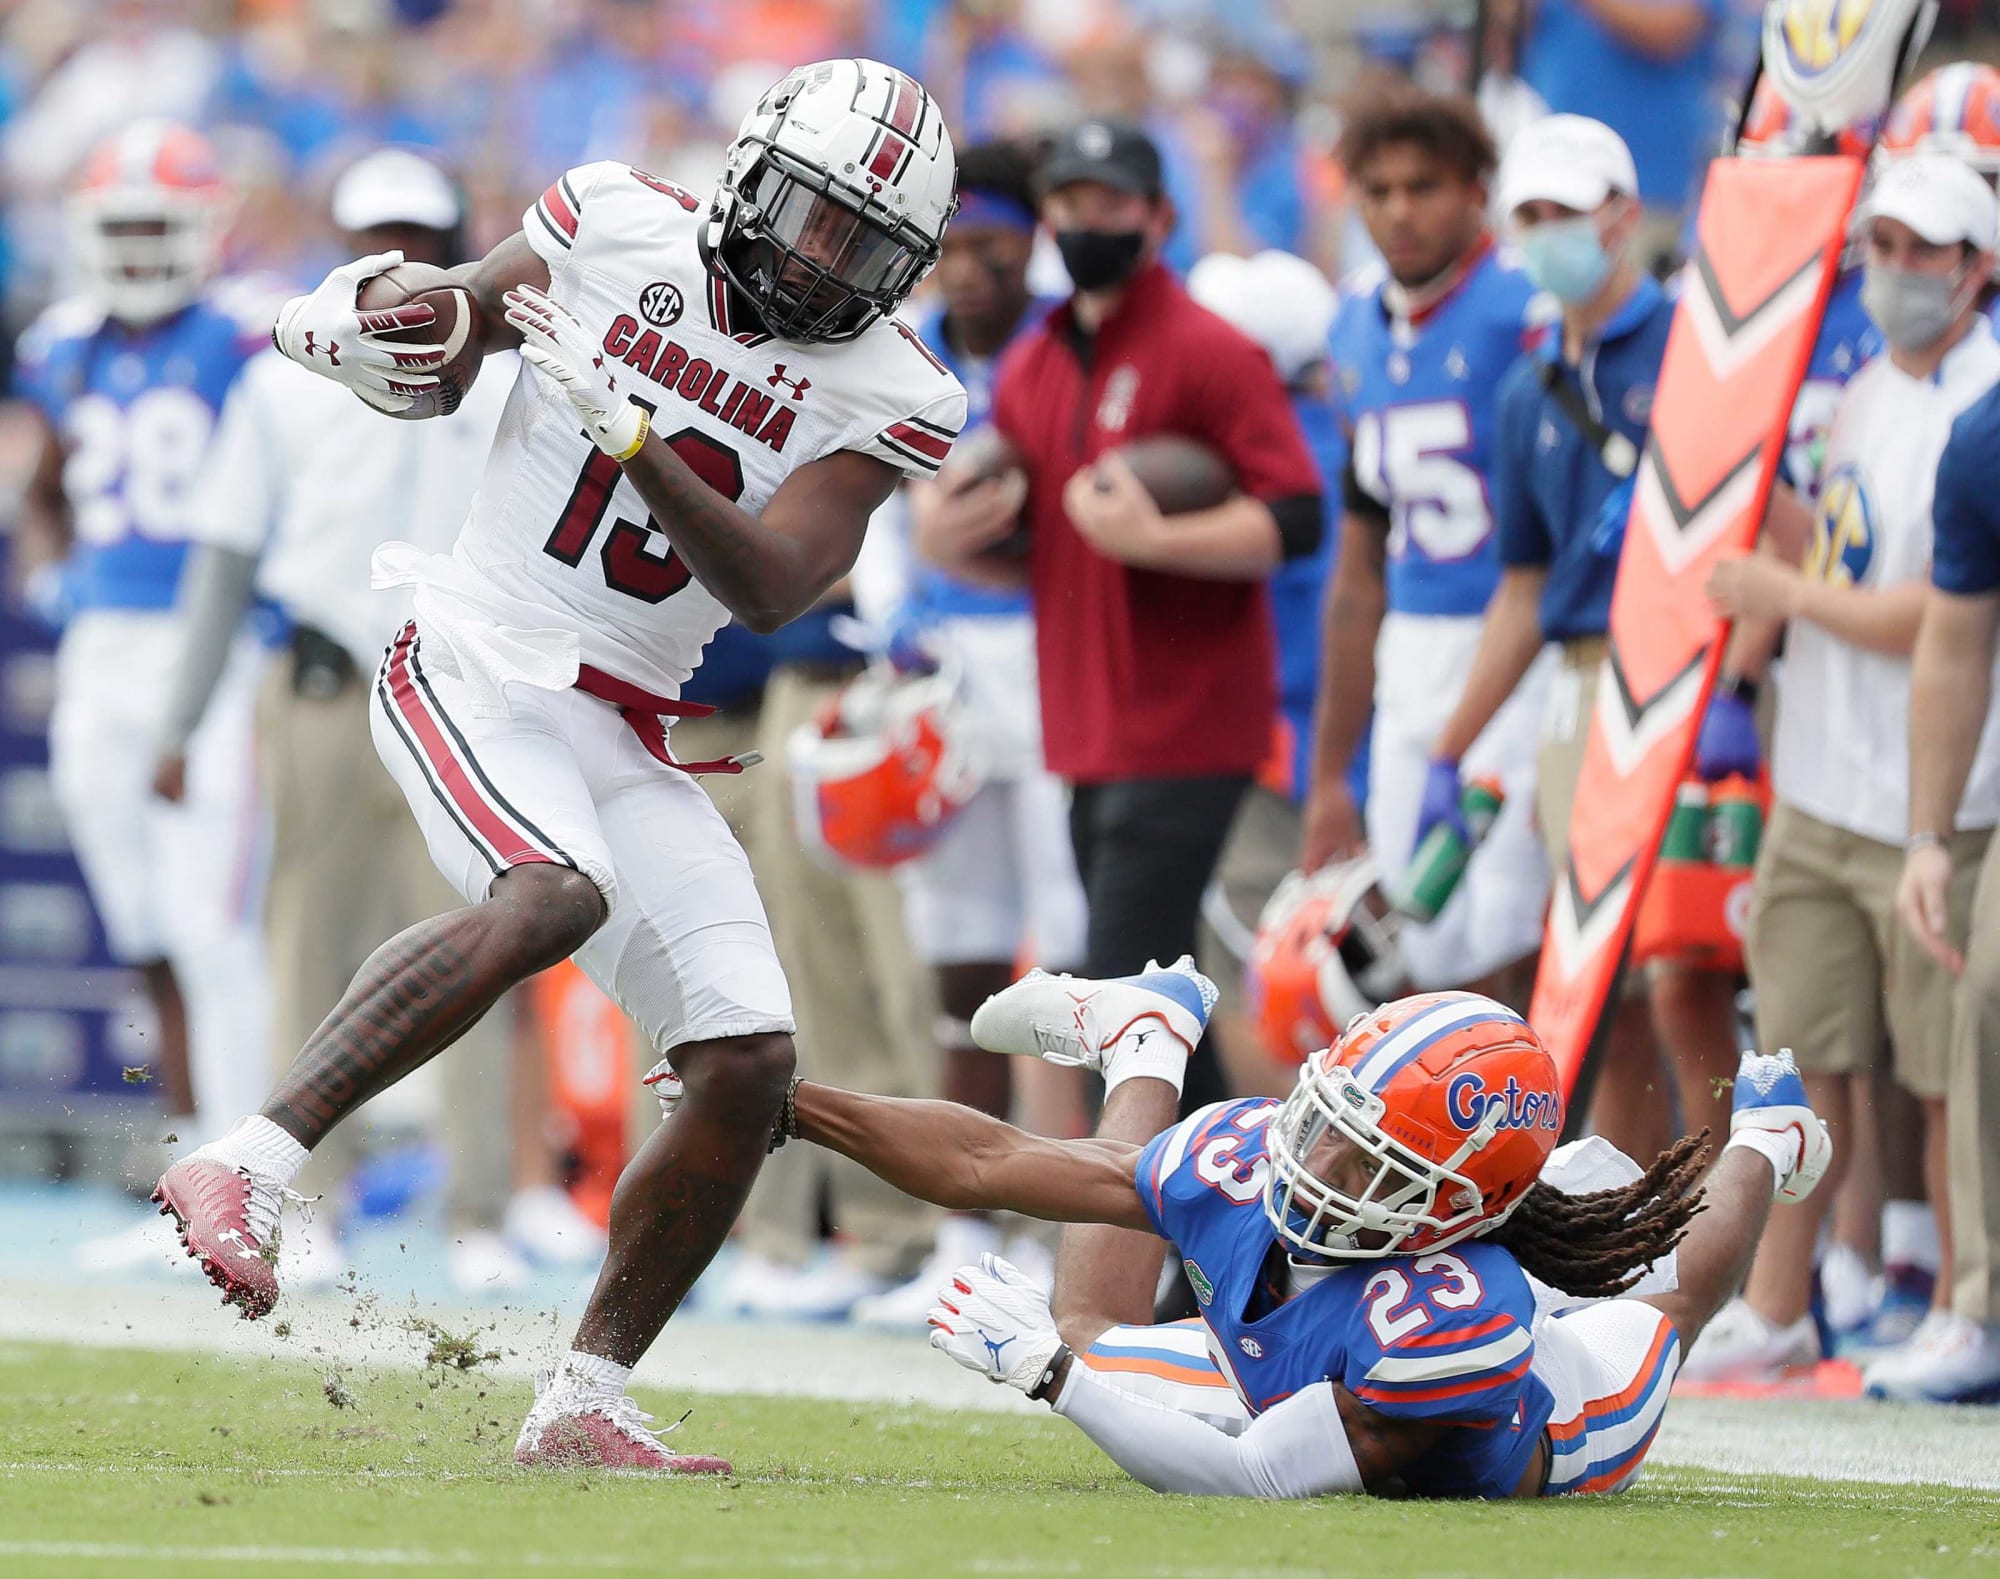 3 lessons from loss to Florida in week 5